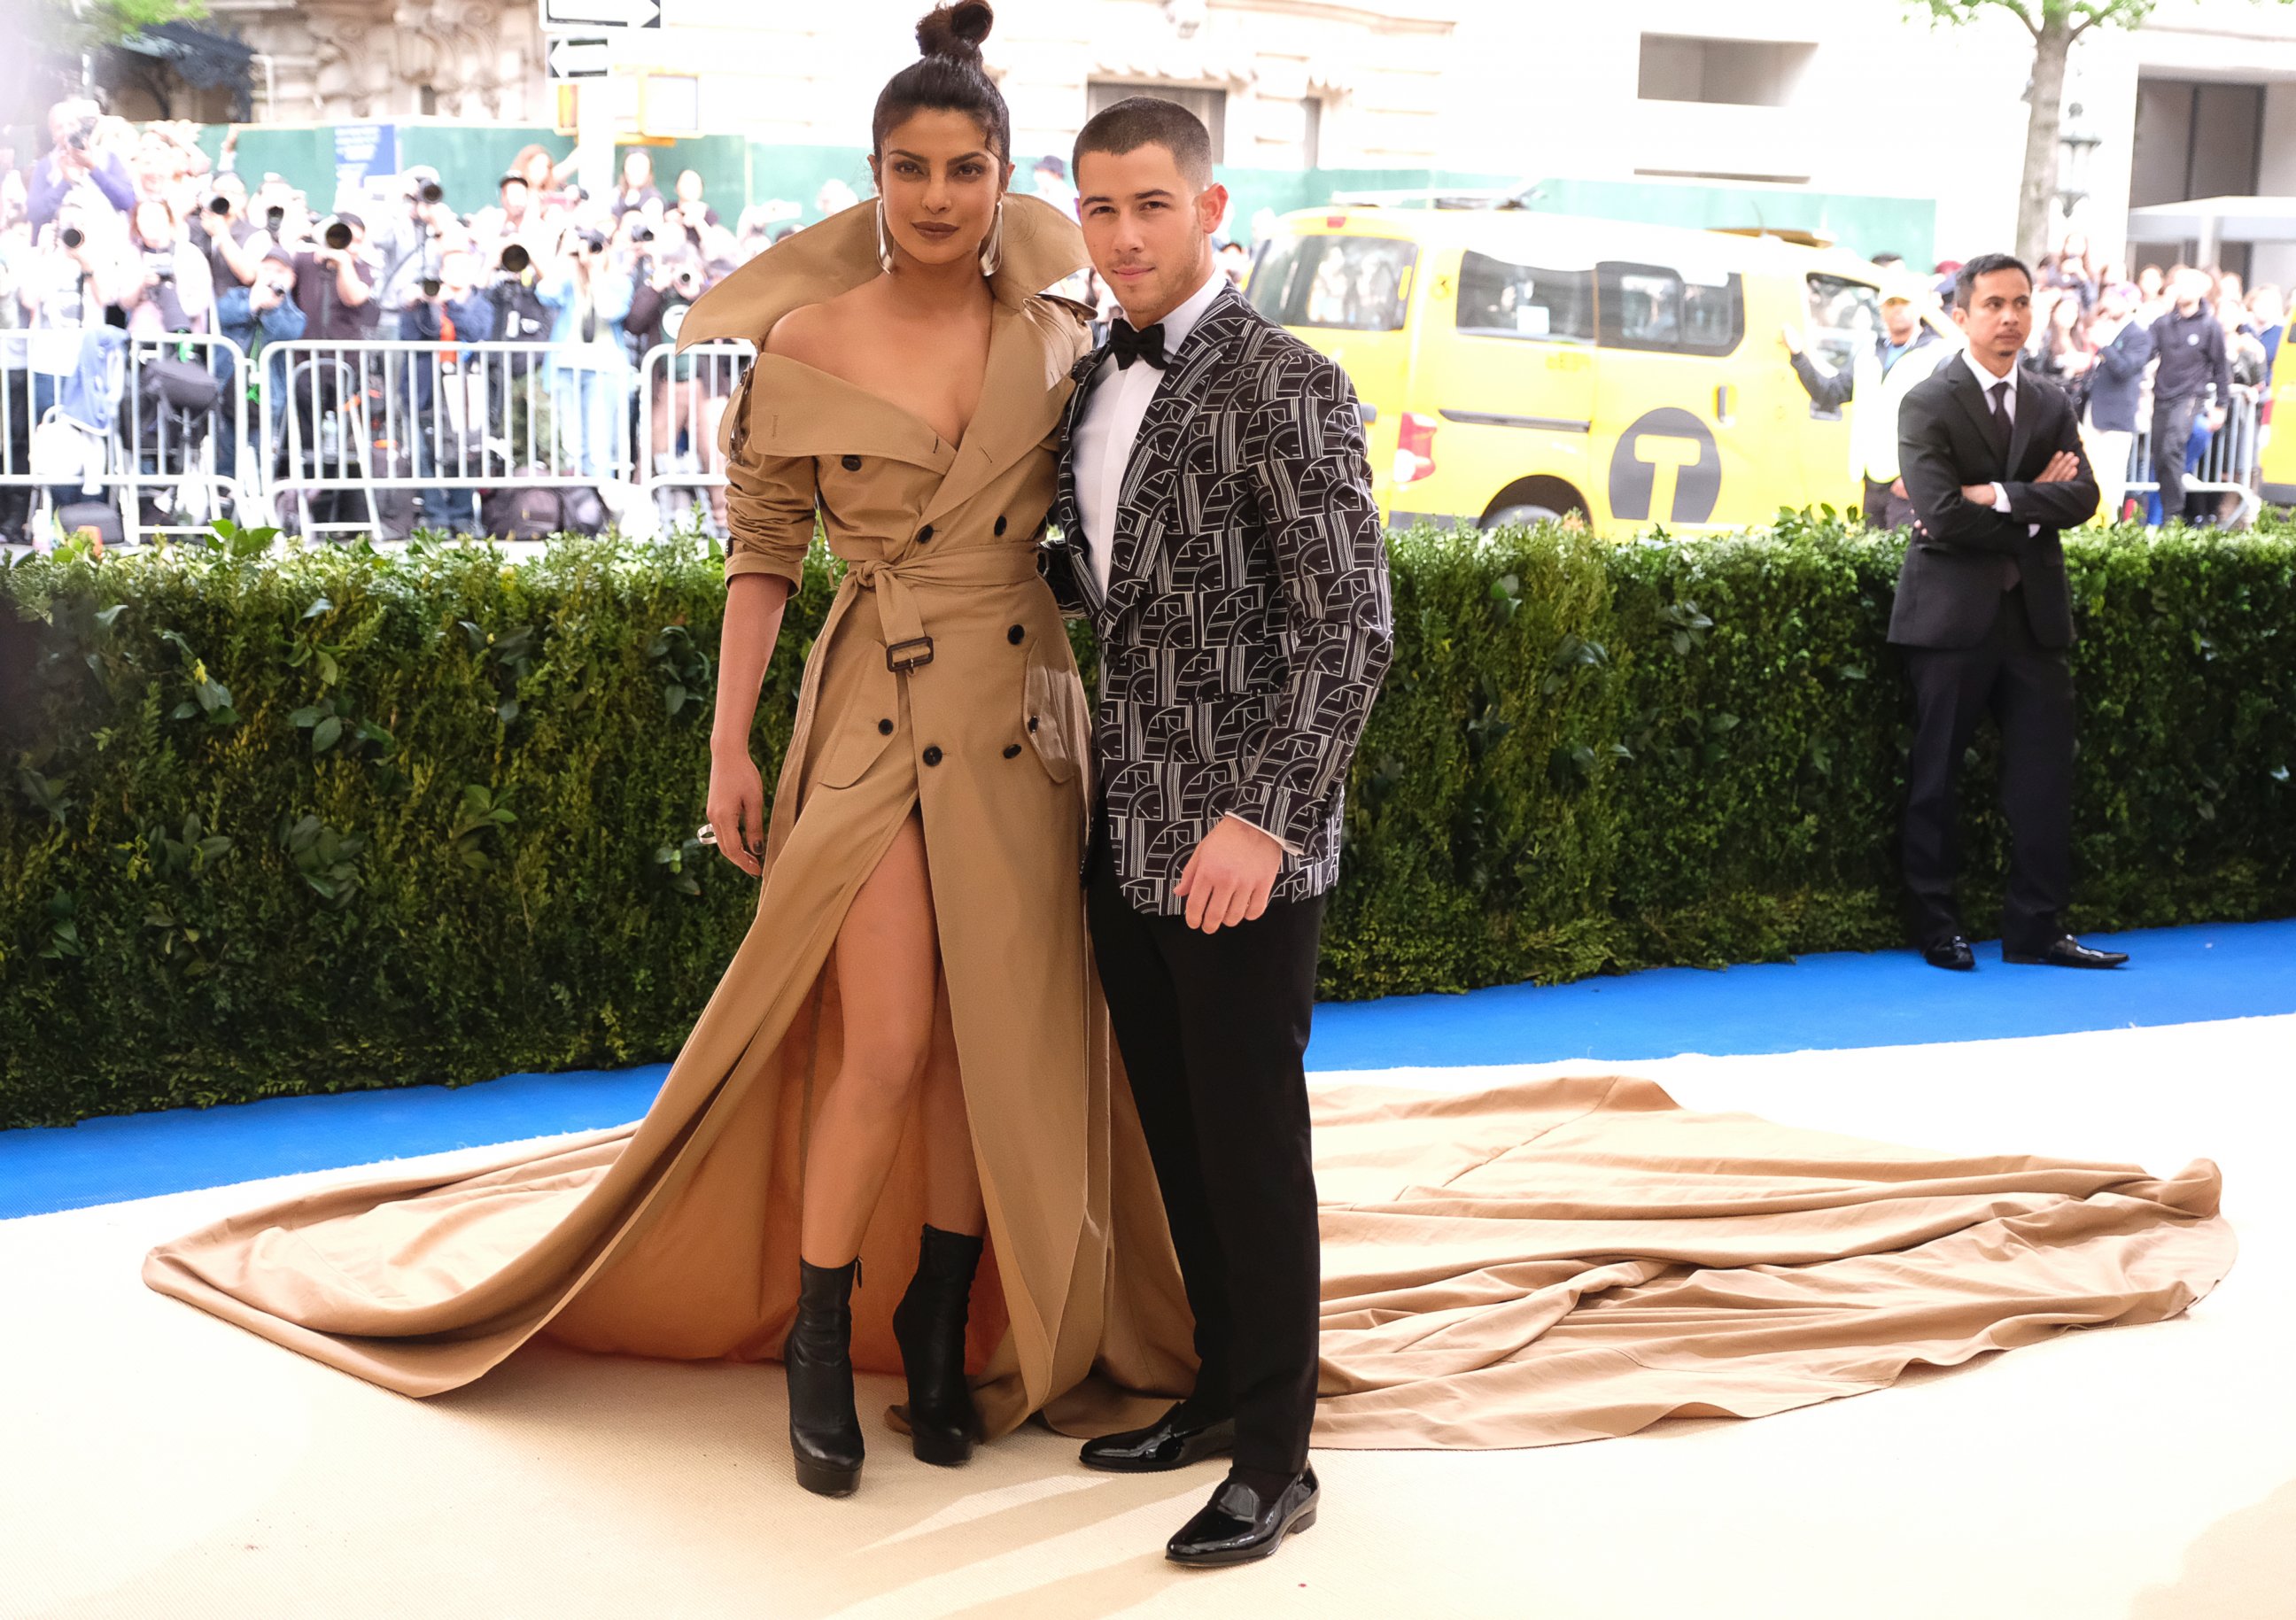 In this May 1, 2017 file photo, Priyanka Chopra, left, and Nick Jonas attend The Metropolitan Museum of Art's Costume Institute benefit gala celebrating the opening of the Rei Kawakubo/Comme des Garçons: Art of the In-Between exhibition in New York.